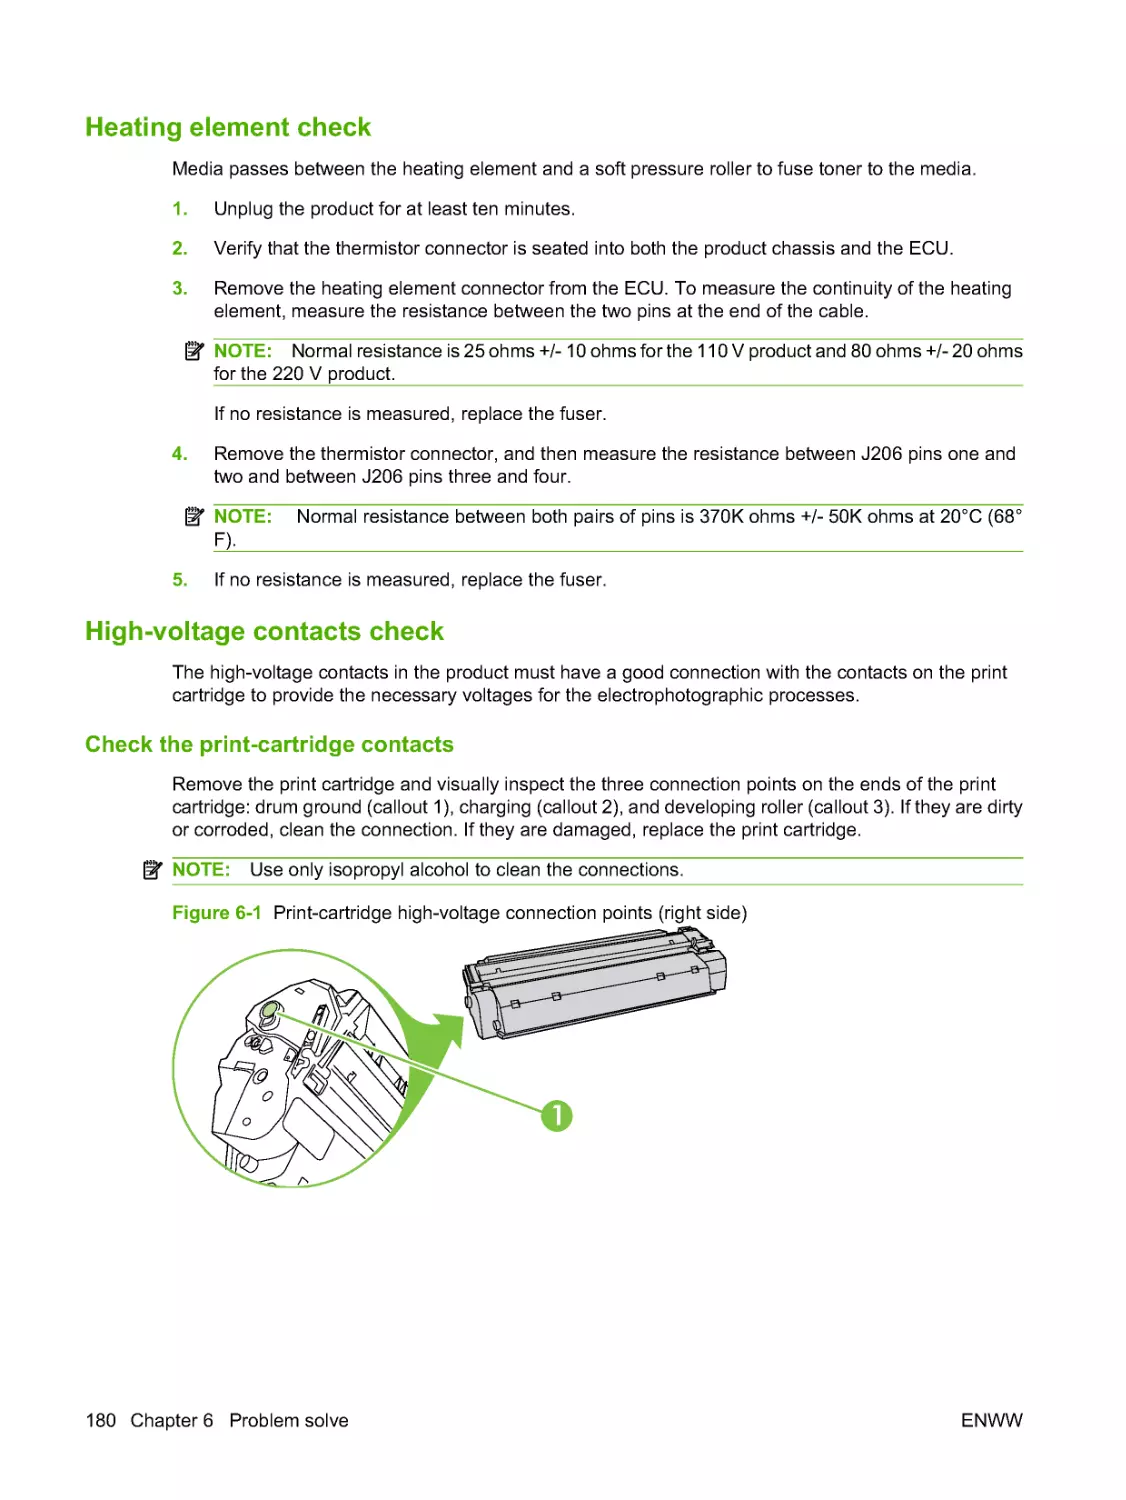 Heating element check
High-voltage contacts check